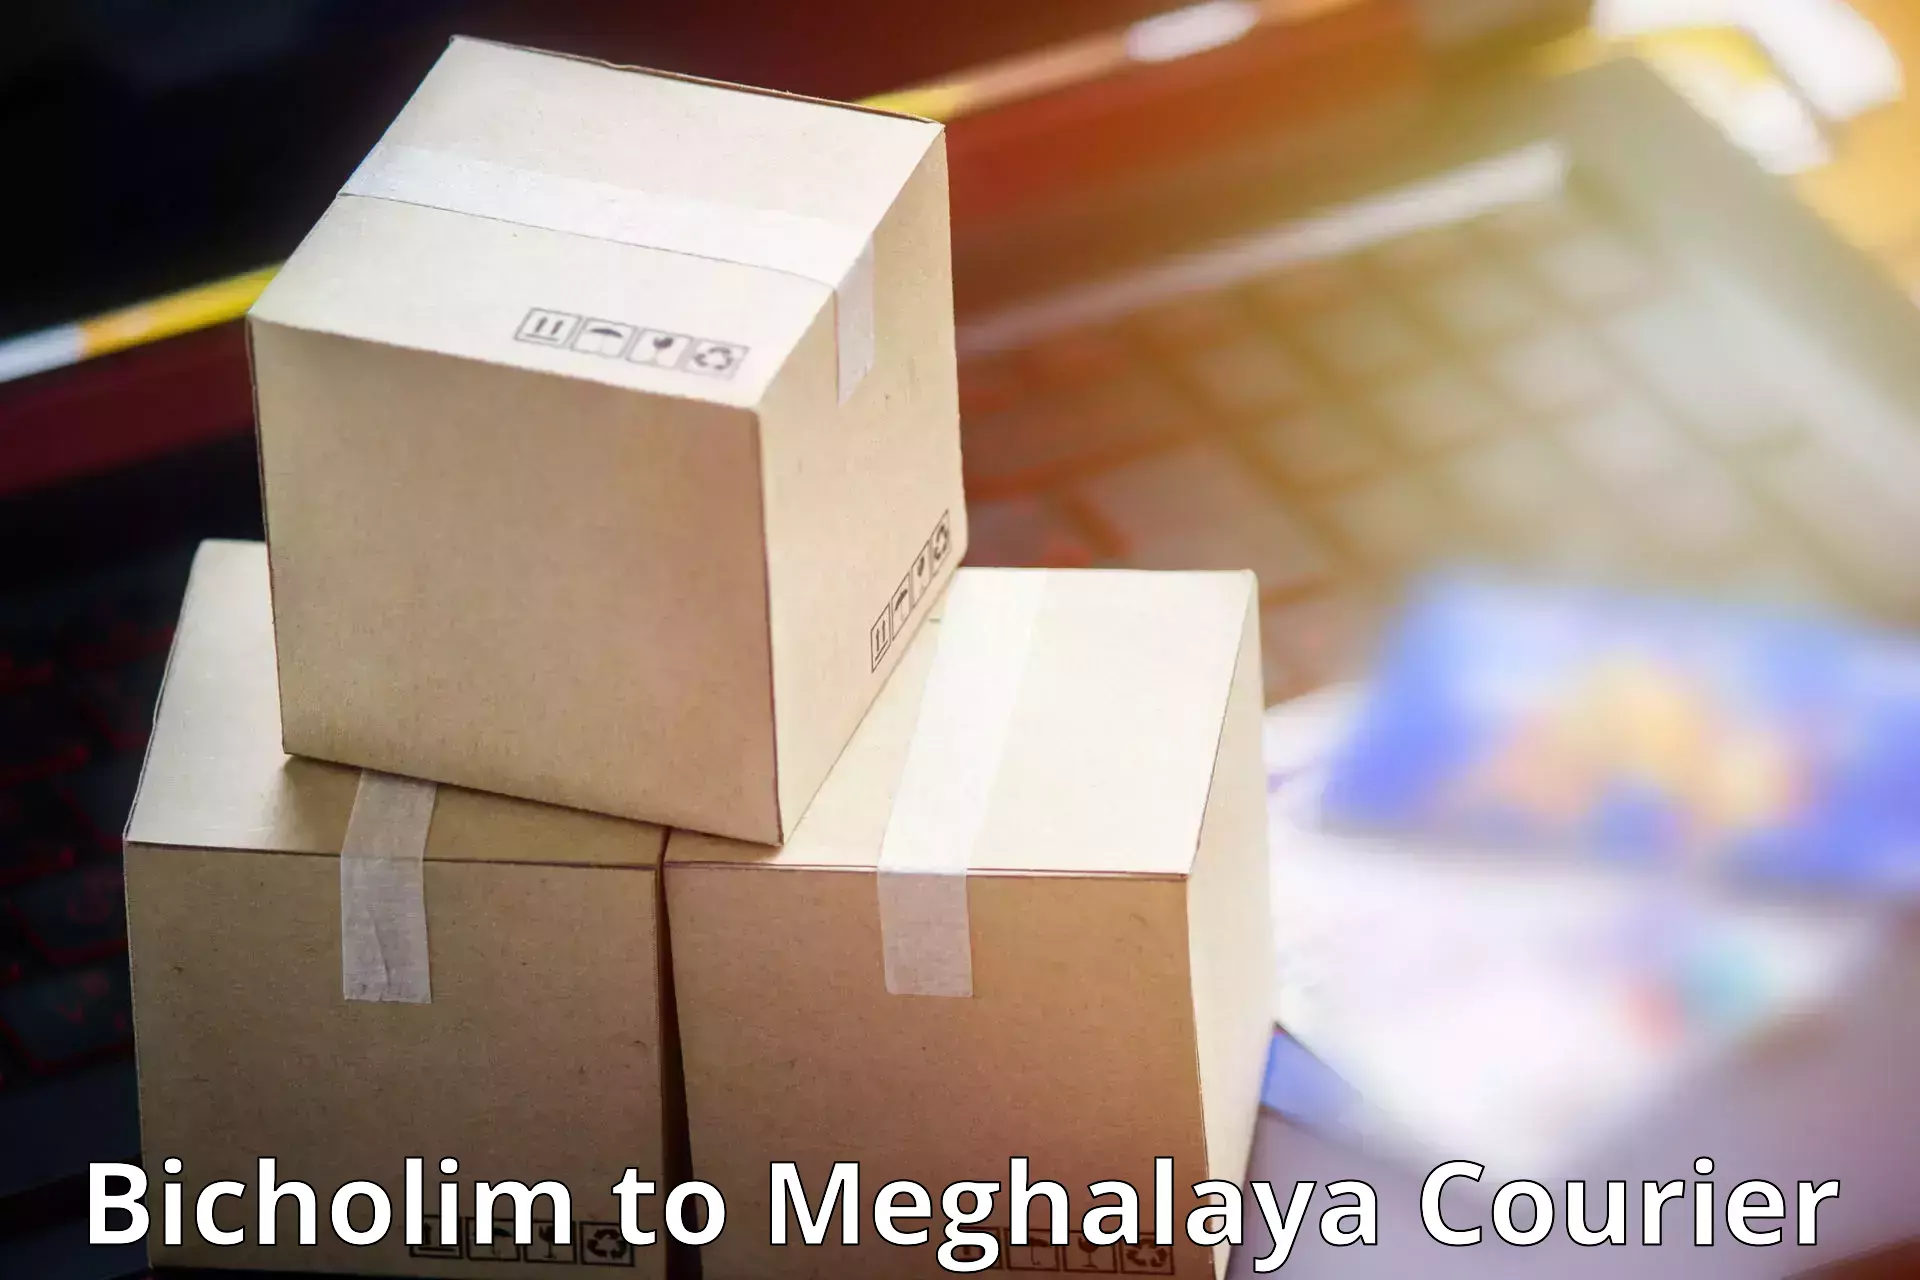 Easy access courier services Bicholim to Jowai